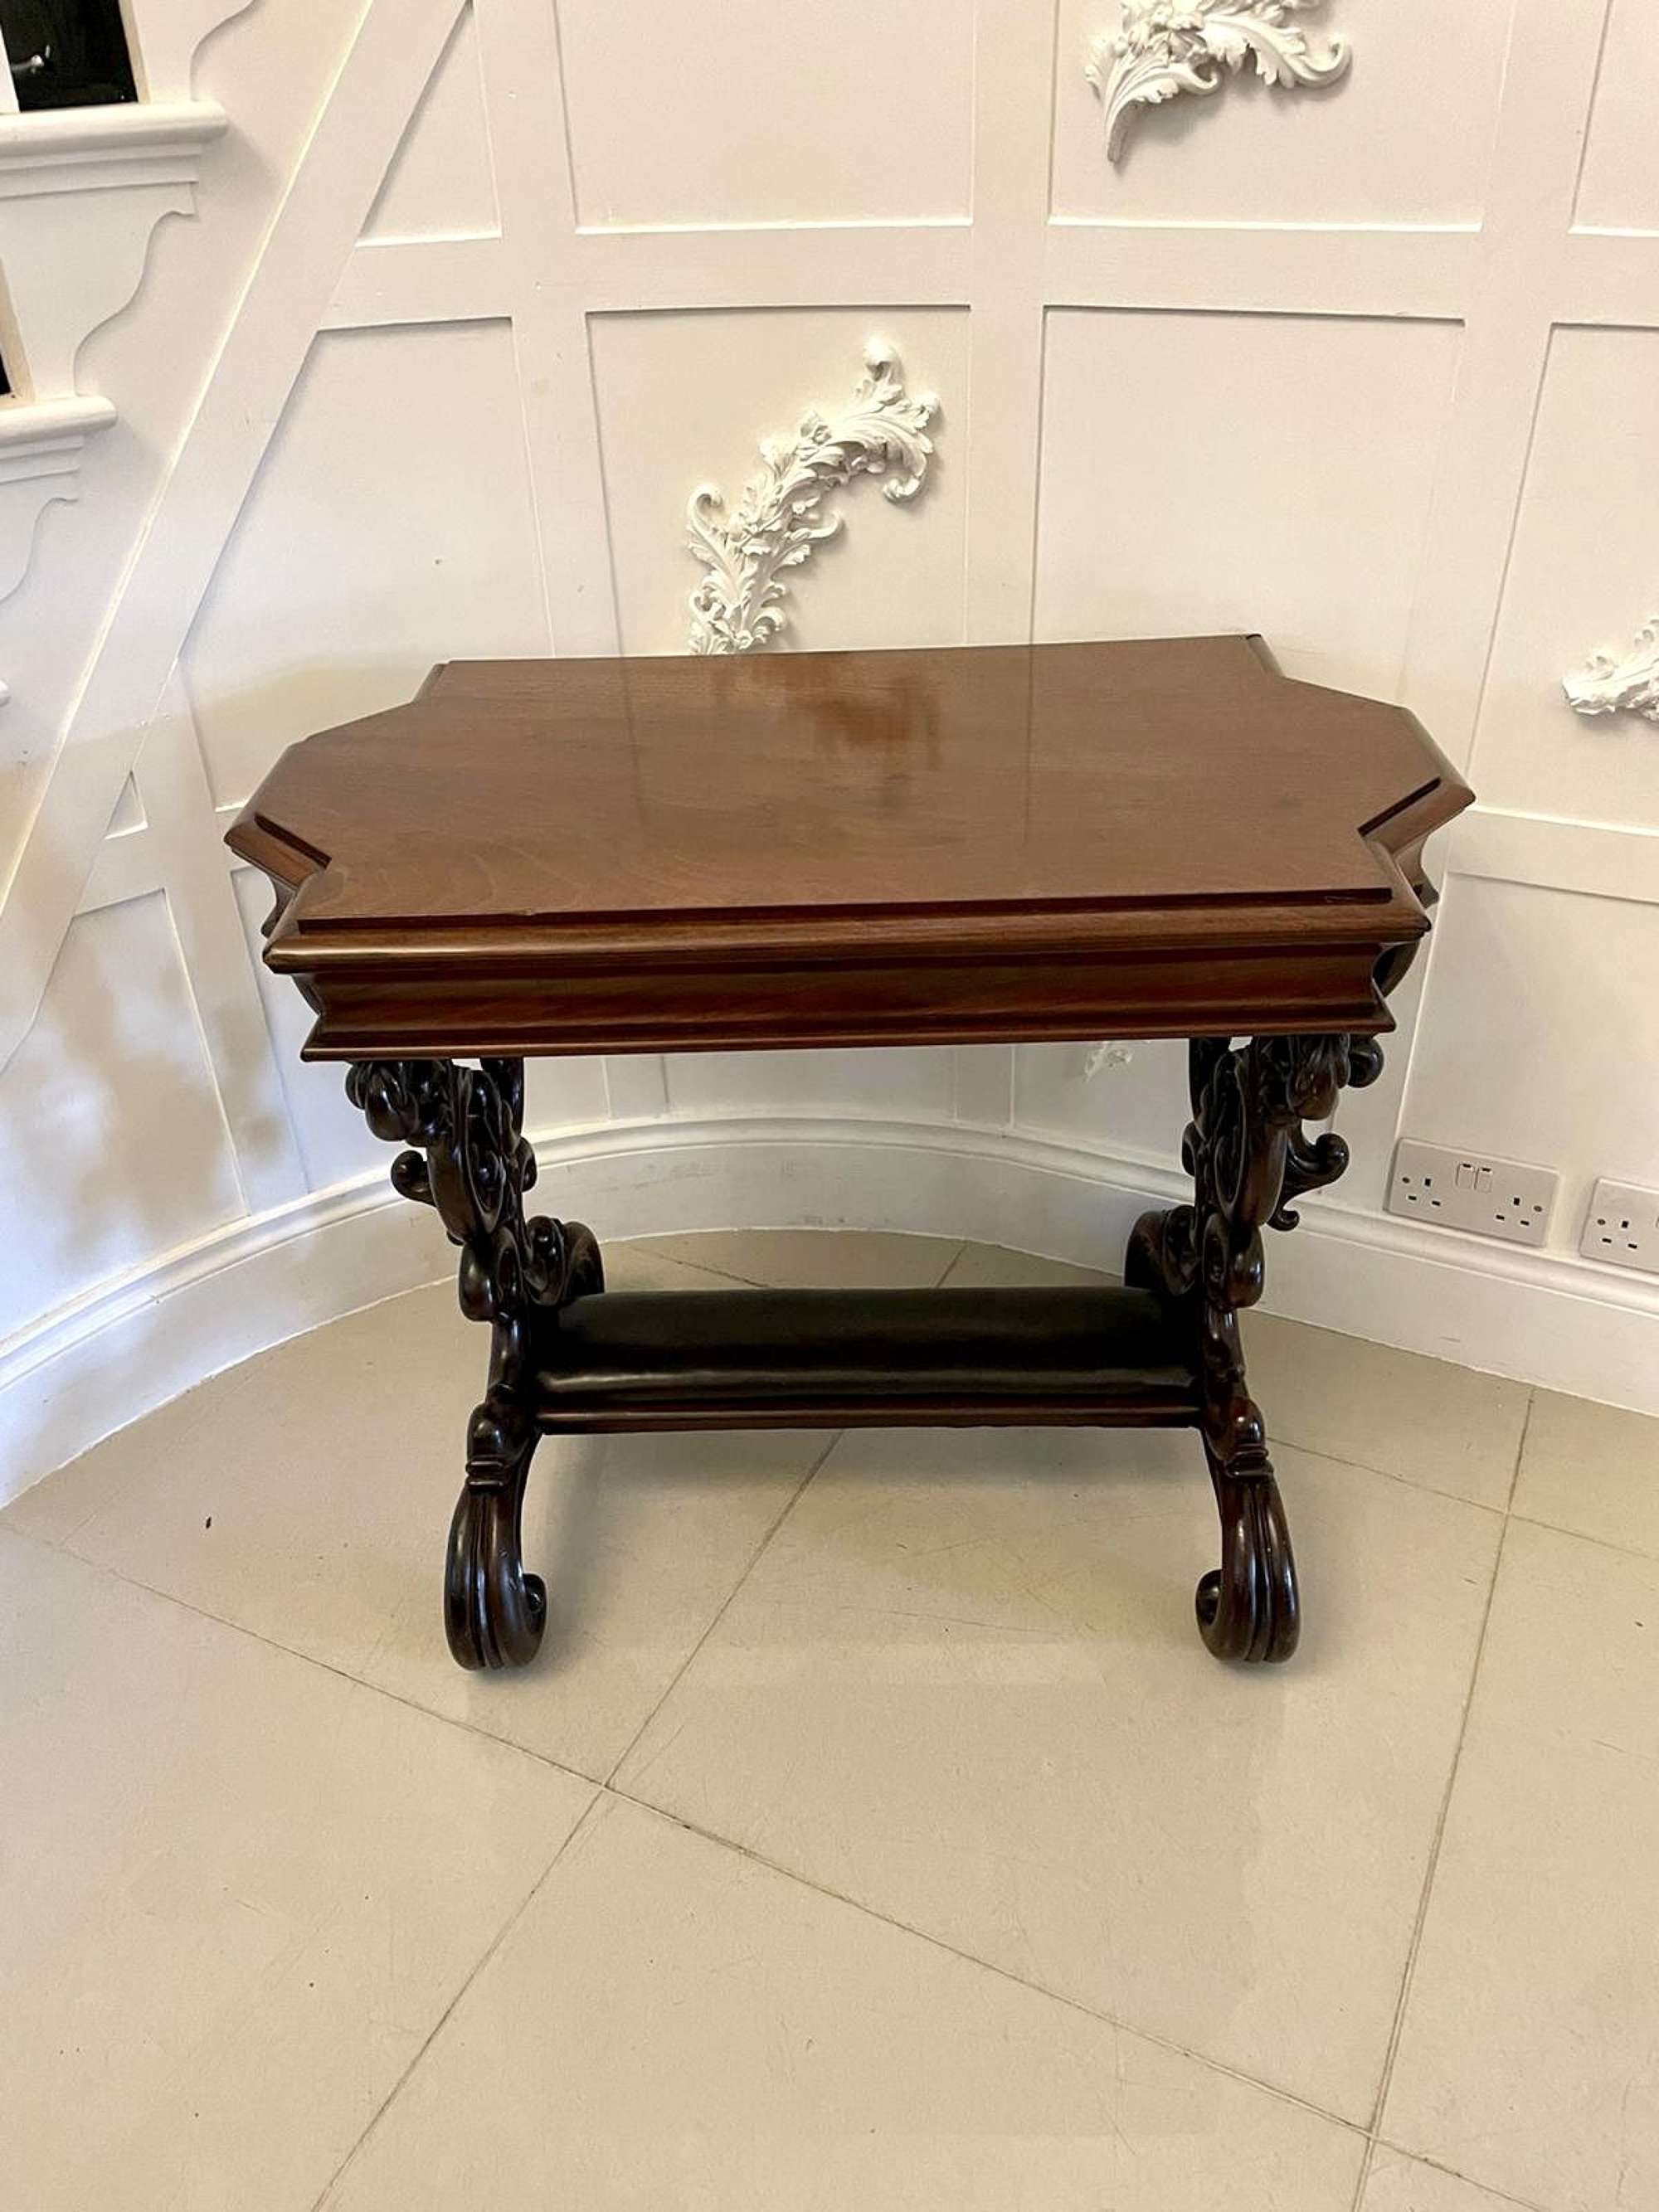 Outstanding Quality 19th Century Antique Carved Mahogany Freestanding Centre/Side Table